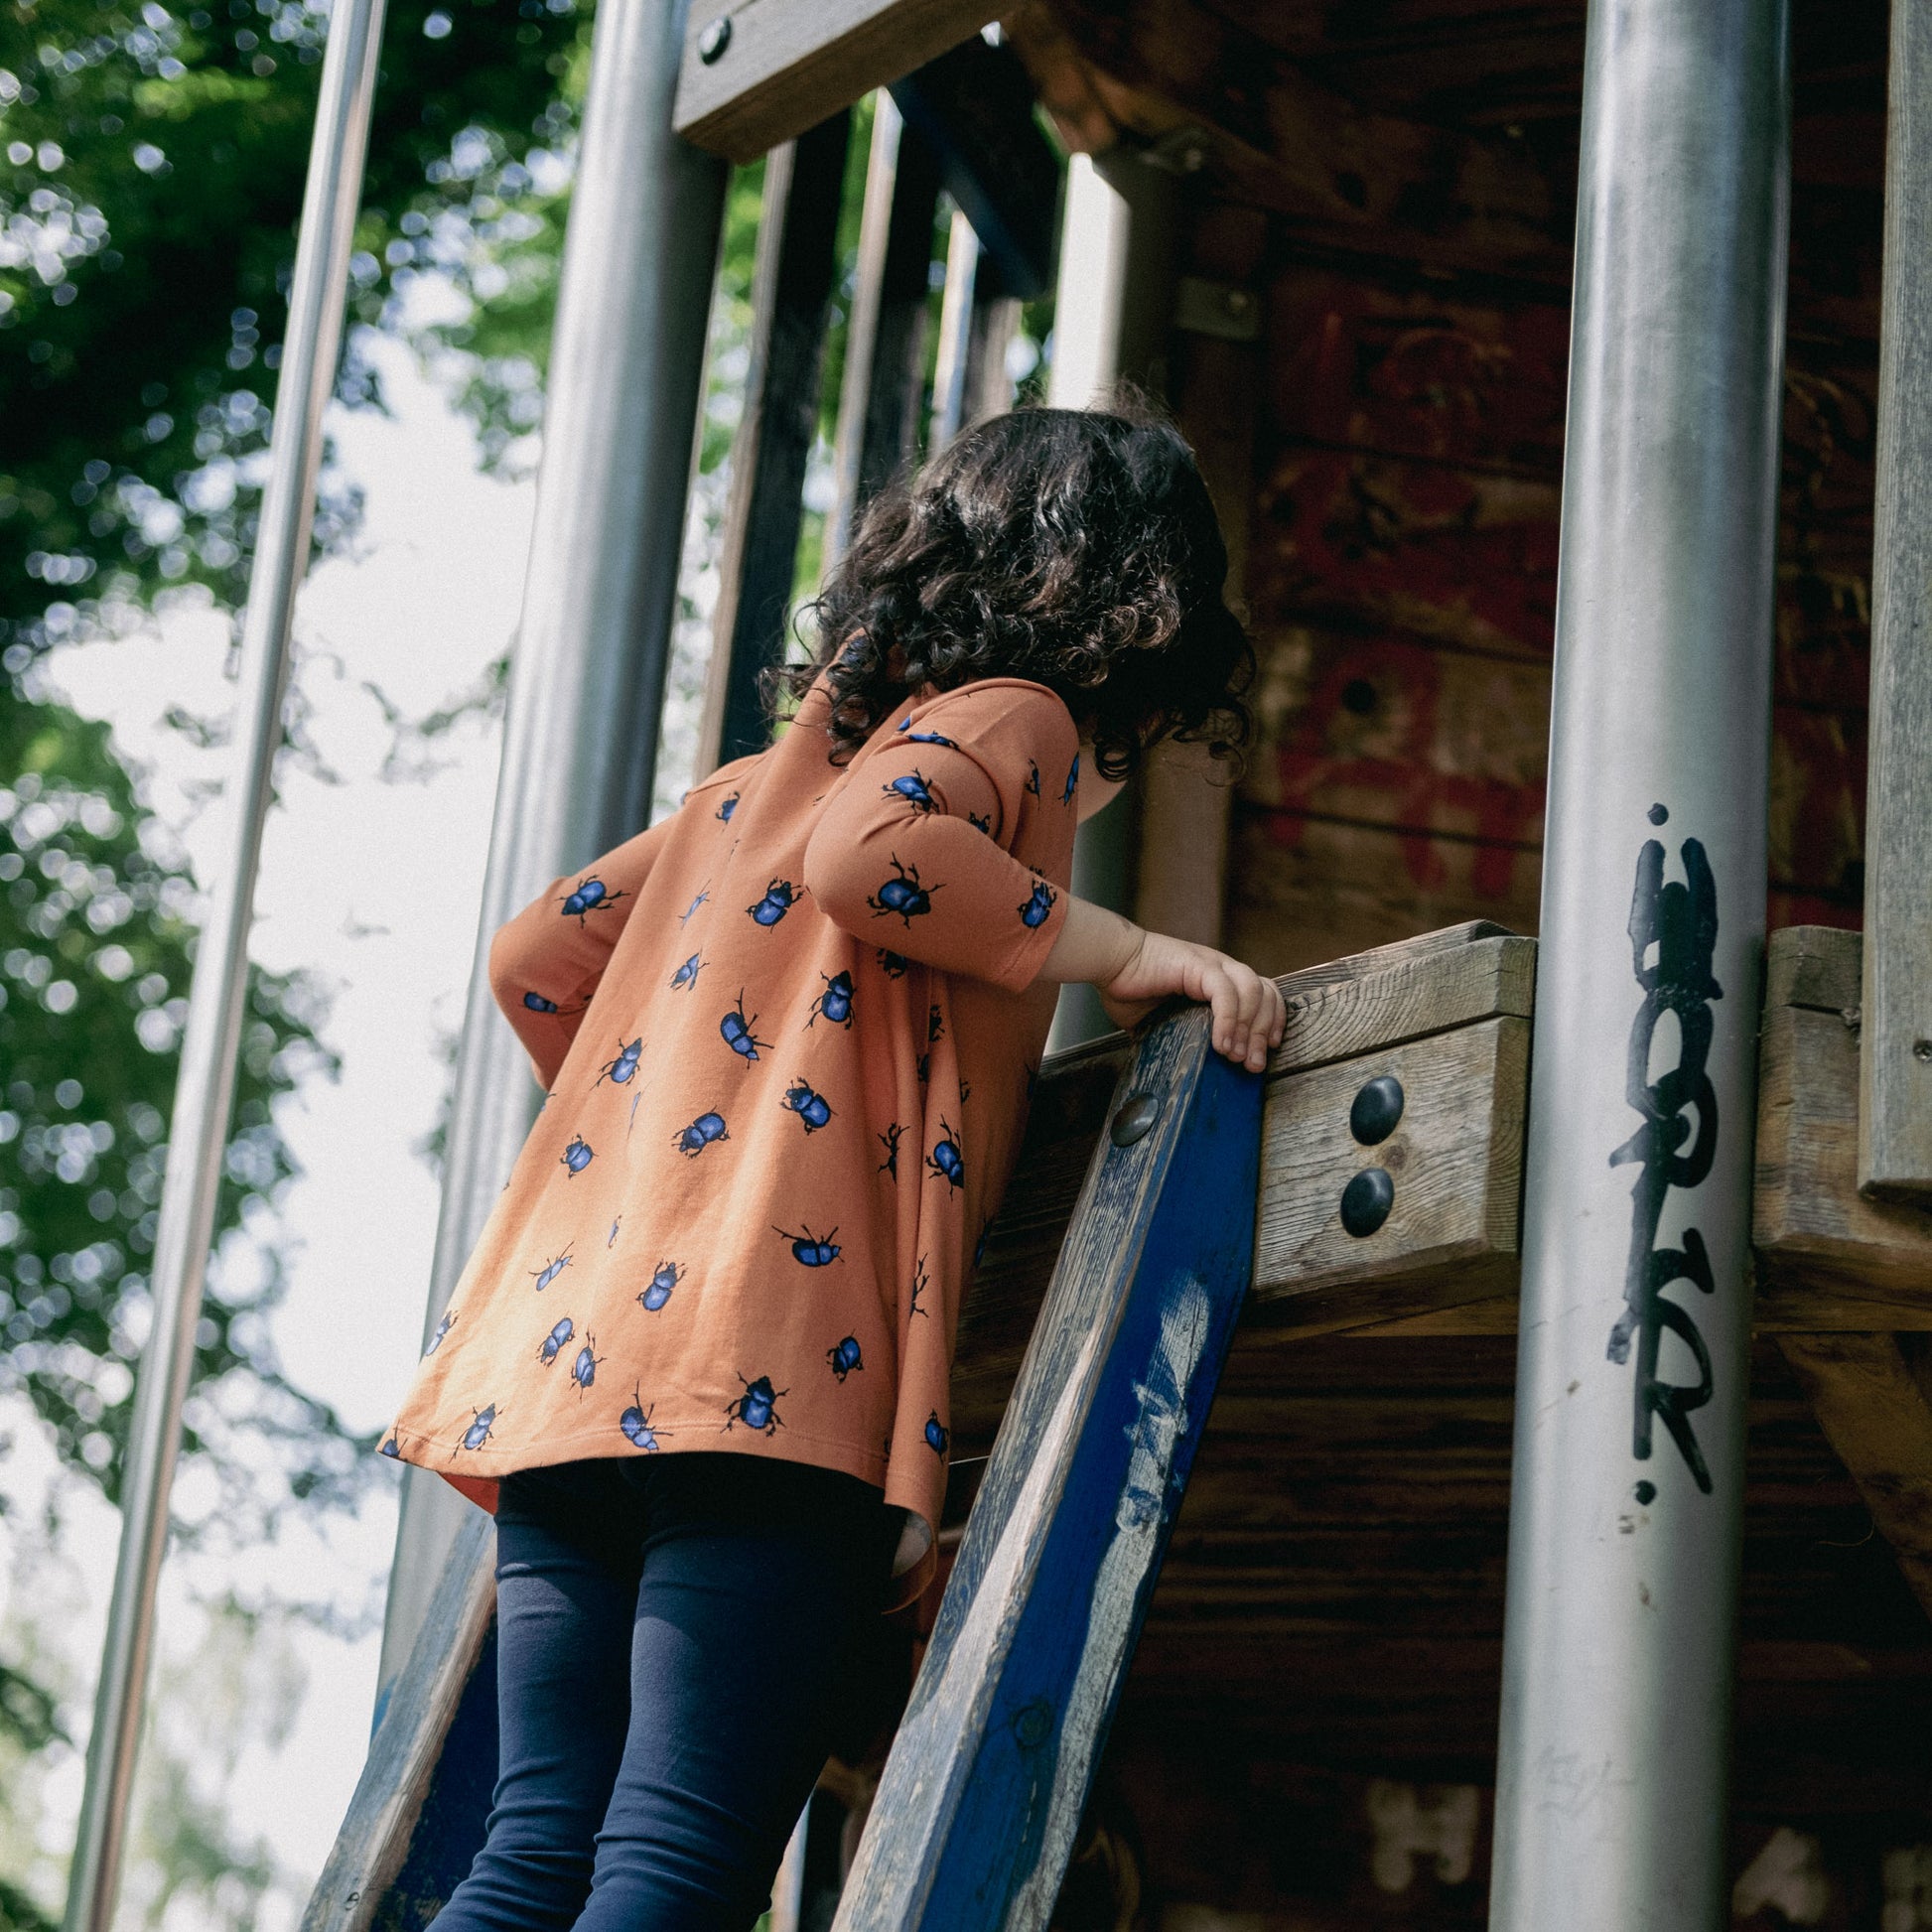 Girl climbing in a climbing frame with a orange tunic with beetles on.